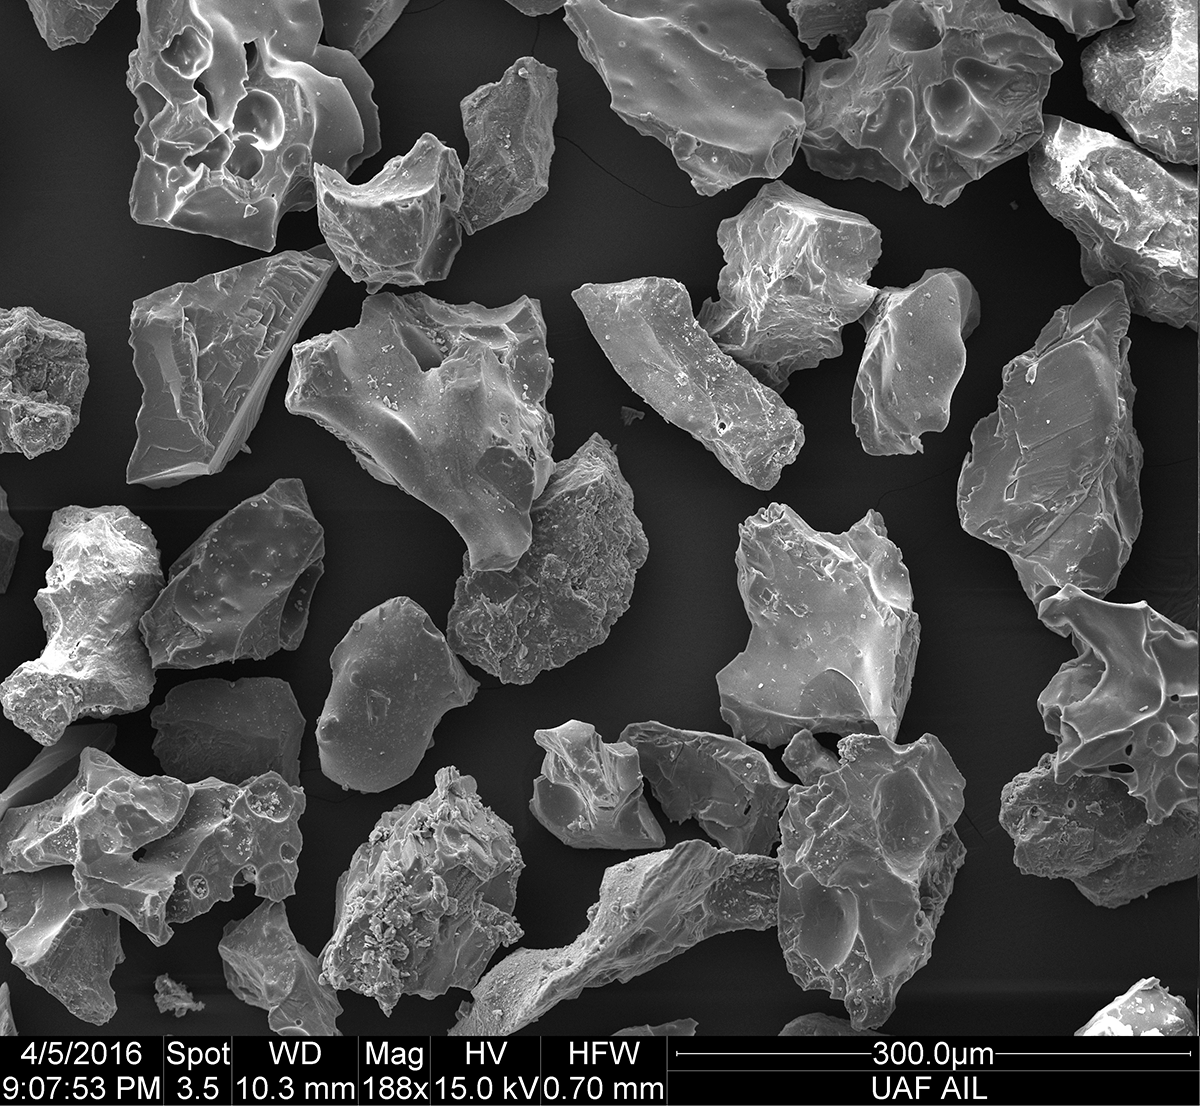 Volcanic ash magnified